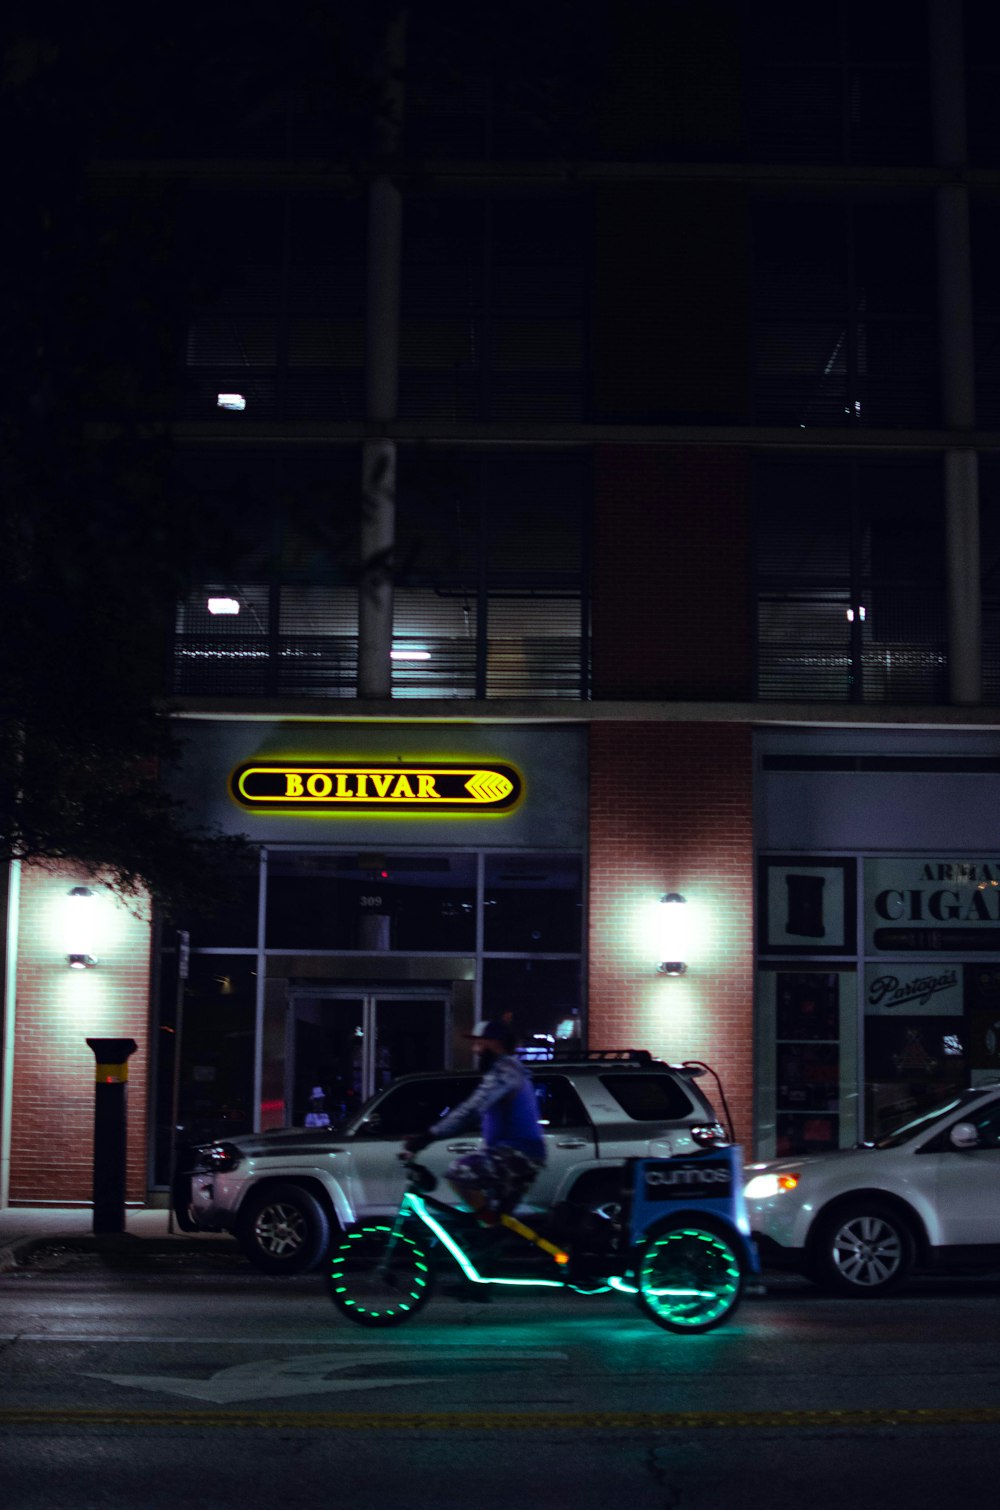 a person riding a motorcycle on a city street at night